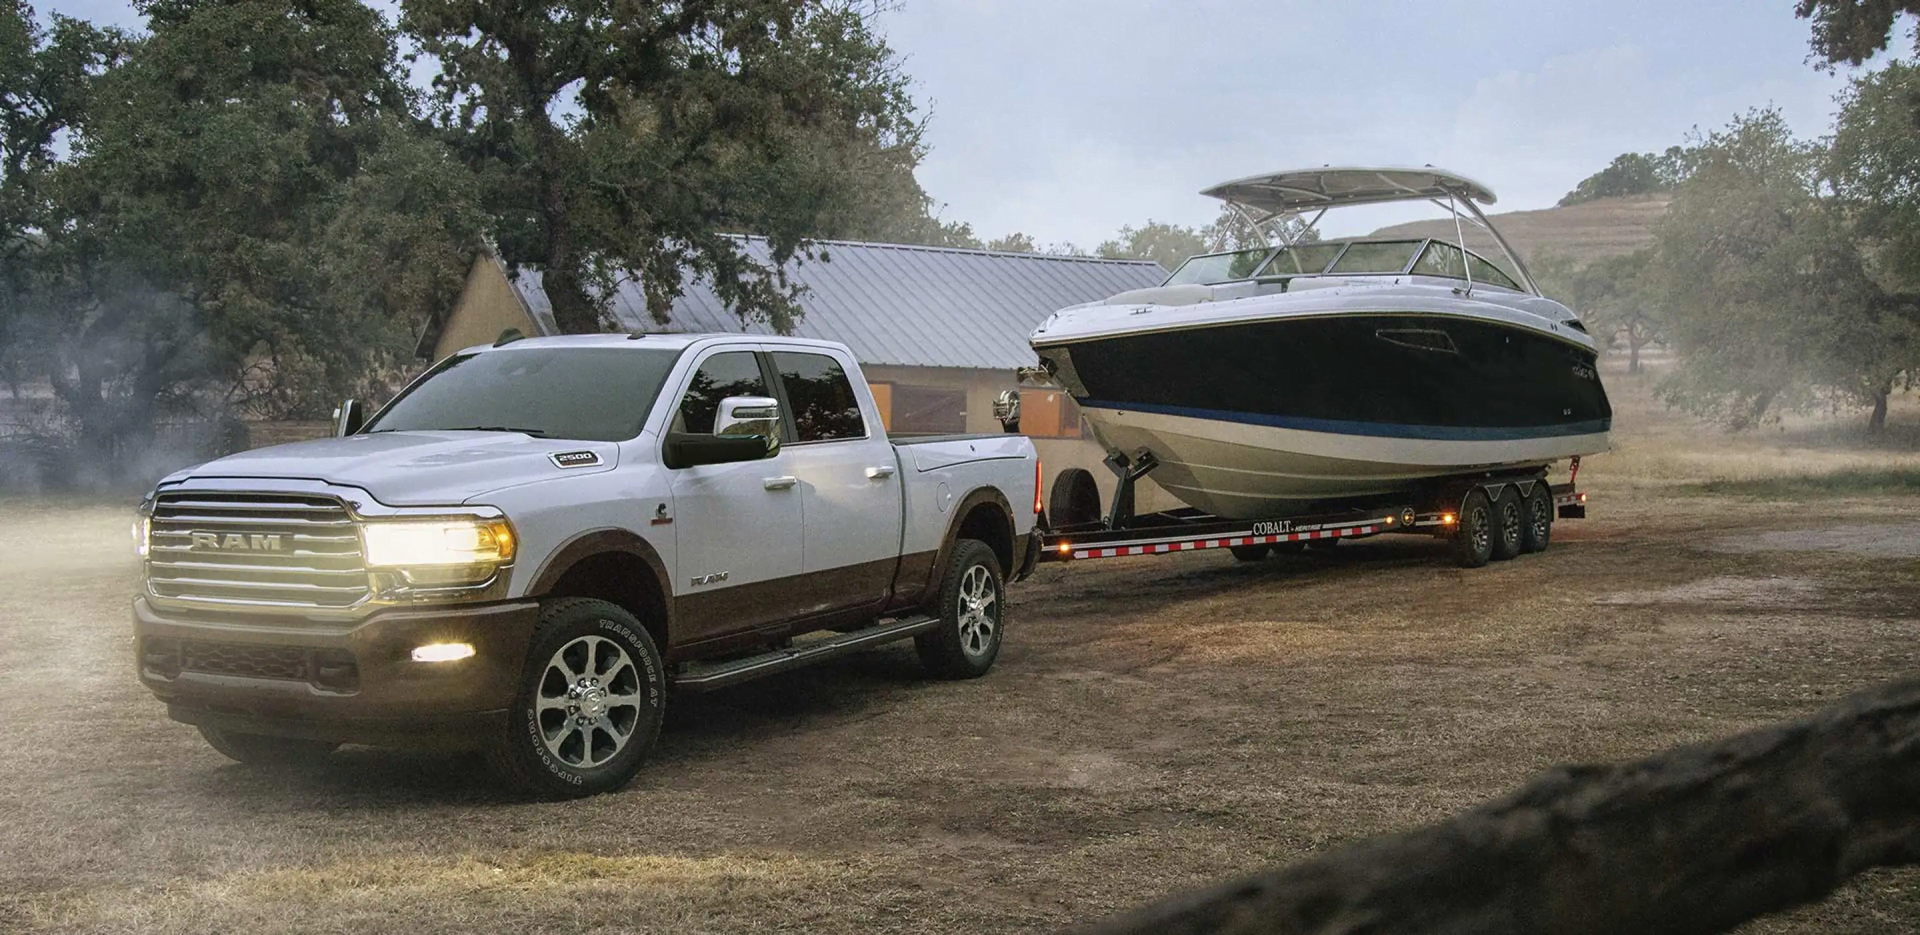 2023 RAM 2500 towing a boat.